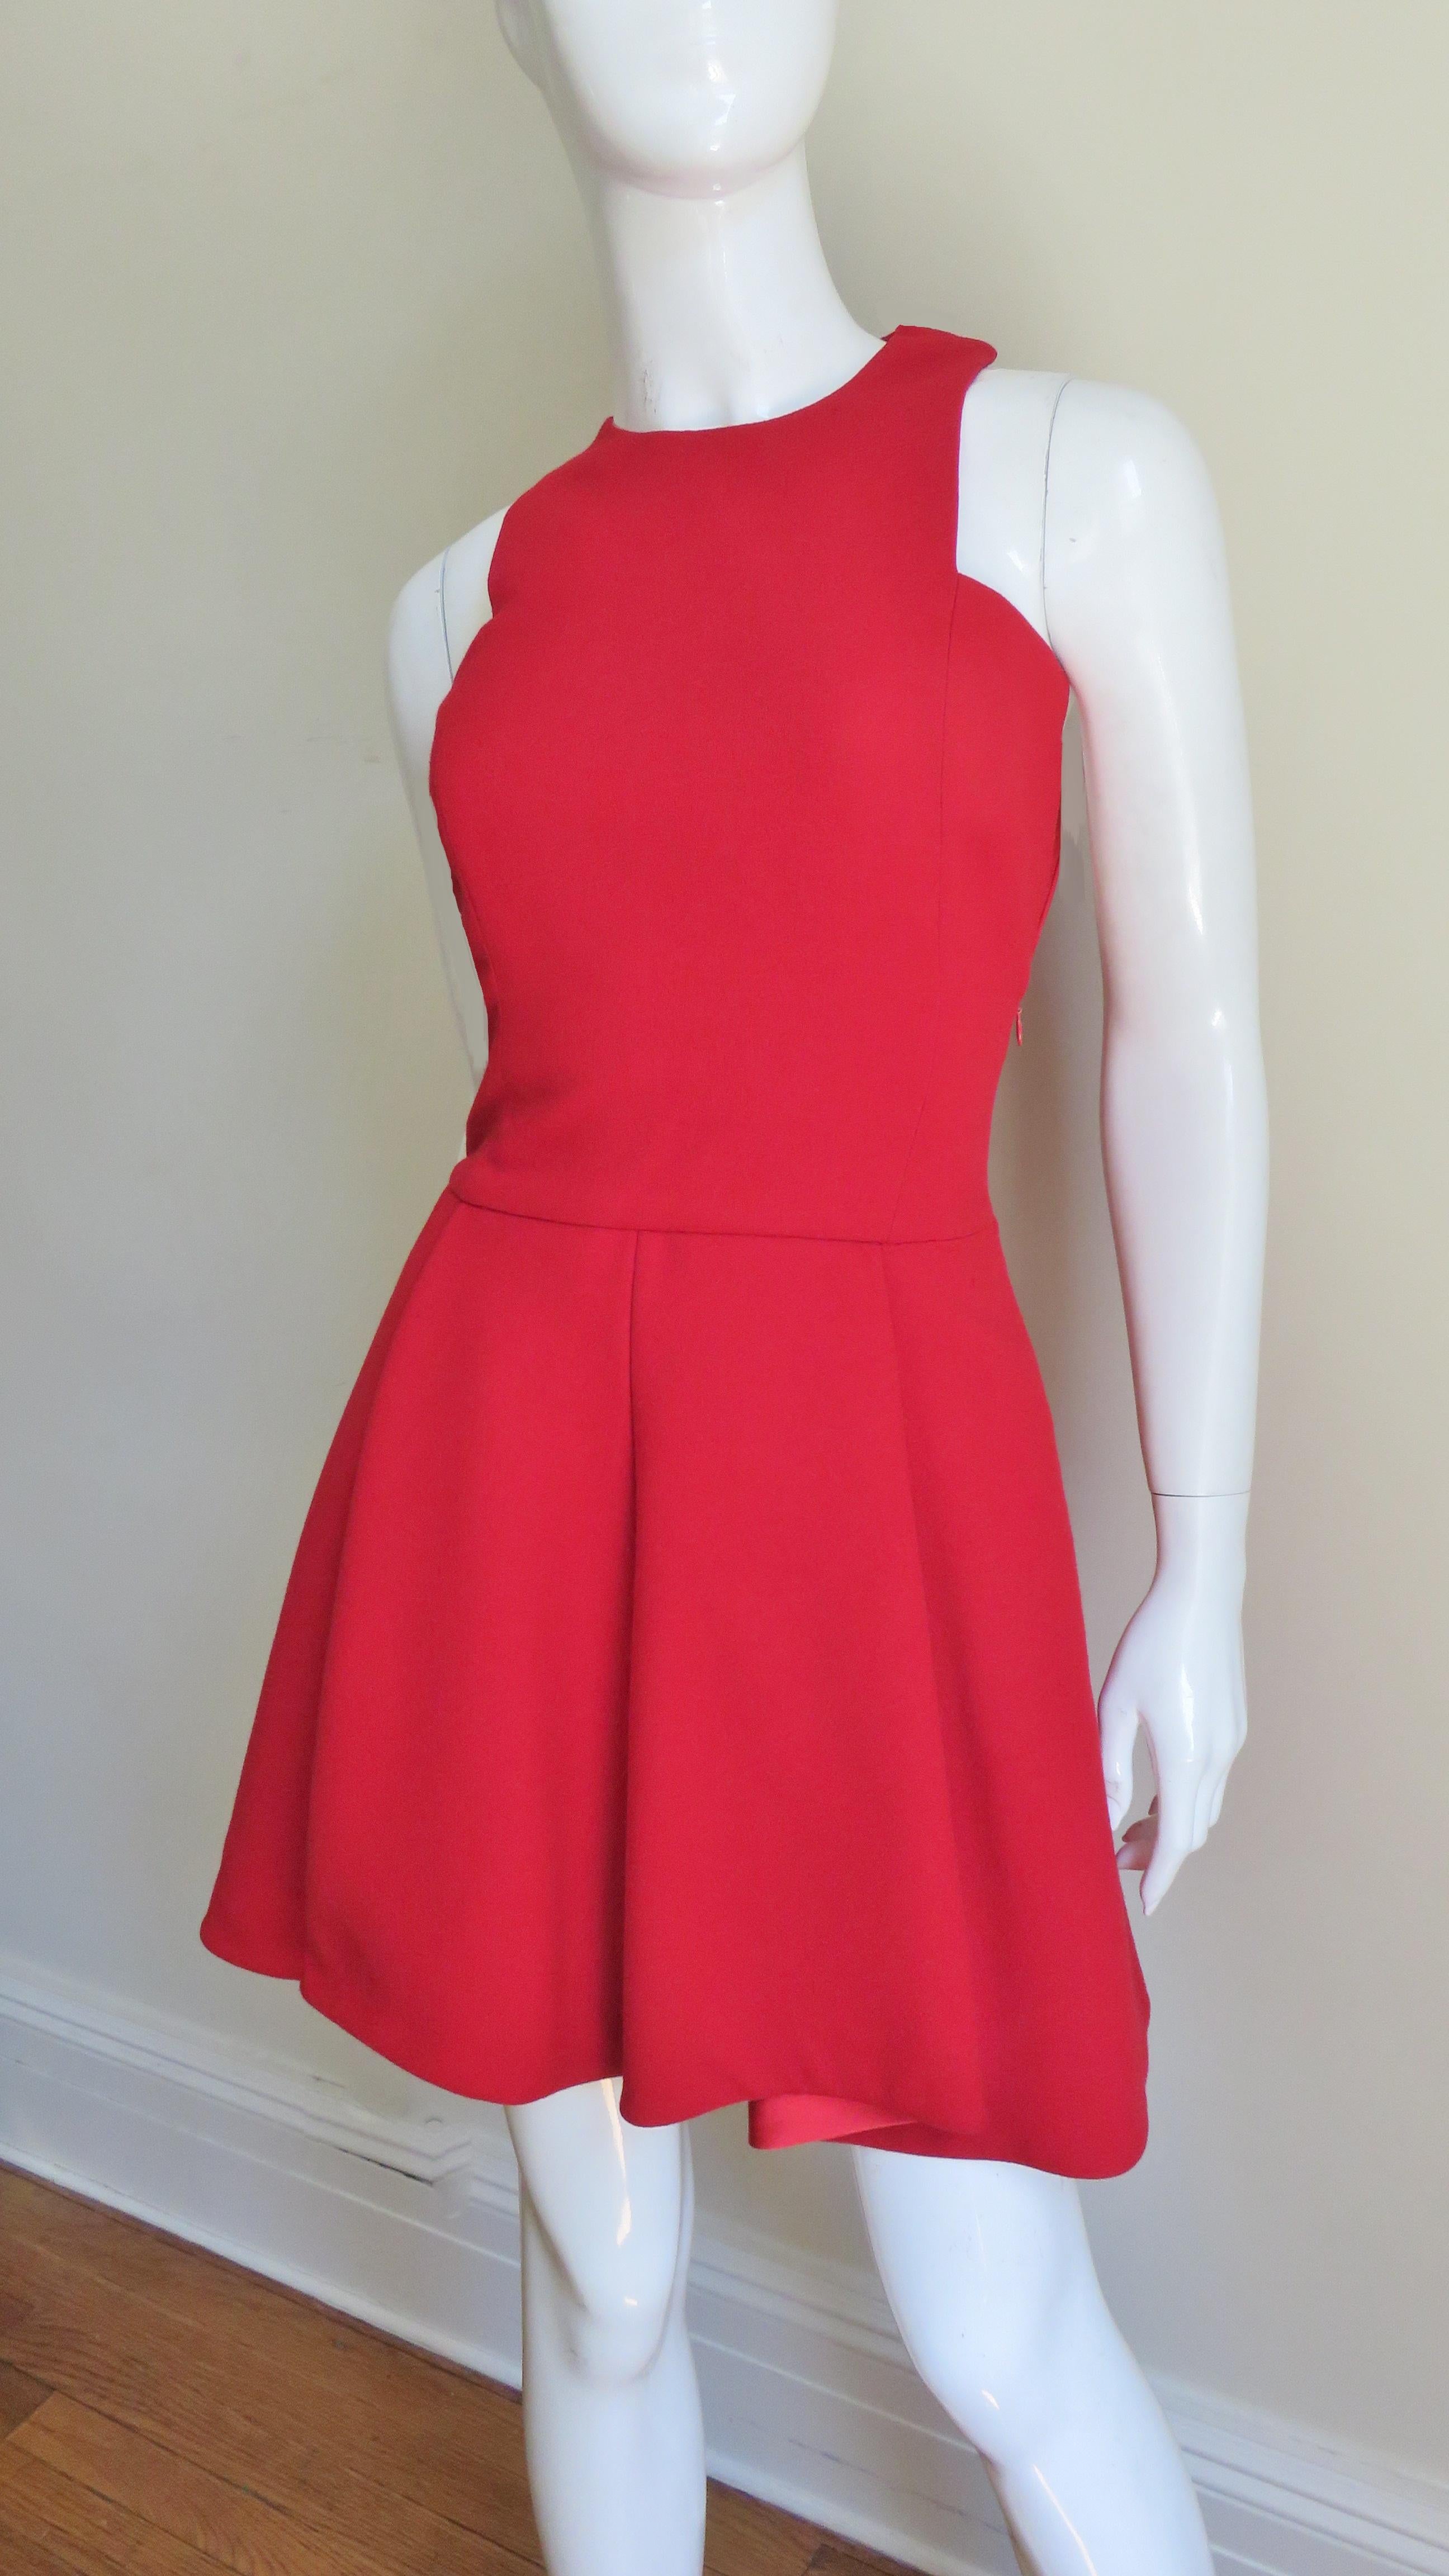 A stunning red wool dress by Gianni Versace. It has great lines with square cut armholes, a fitted bodice and fabulous flared skirt with the back a few inches longer and fuller than the front.  The dress has an invisible side zipper, is fully lined